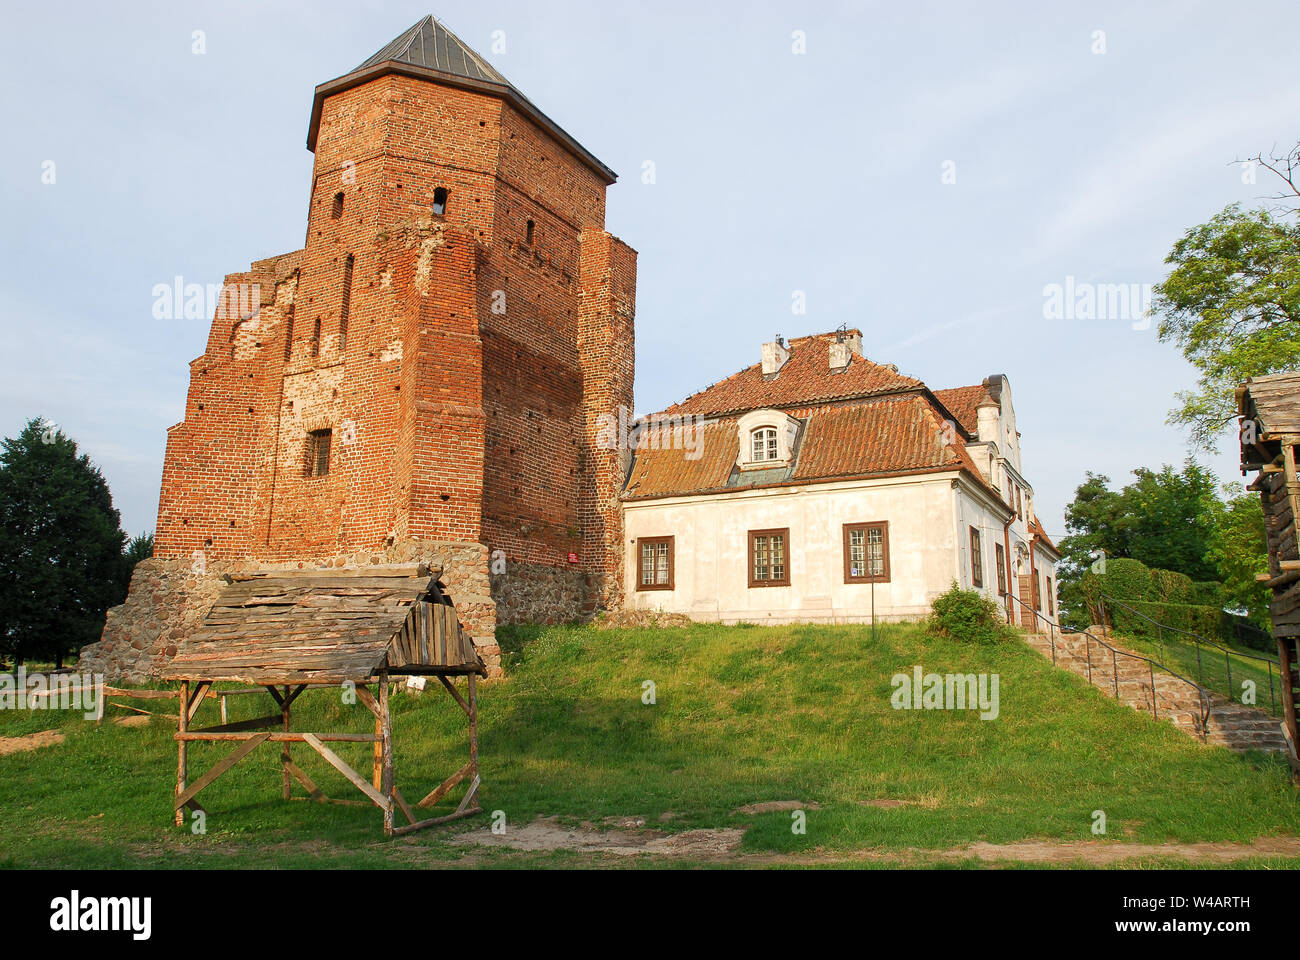 Gothic ducal castle built by the Masovian princes in XV century in Liw, Poland. July 6th 2019 © Wojciech Strozyk / Alamy Stock Photo Stock Photo